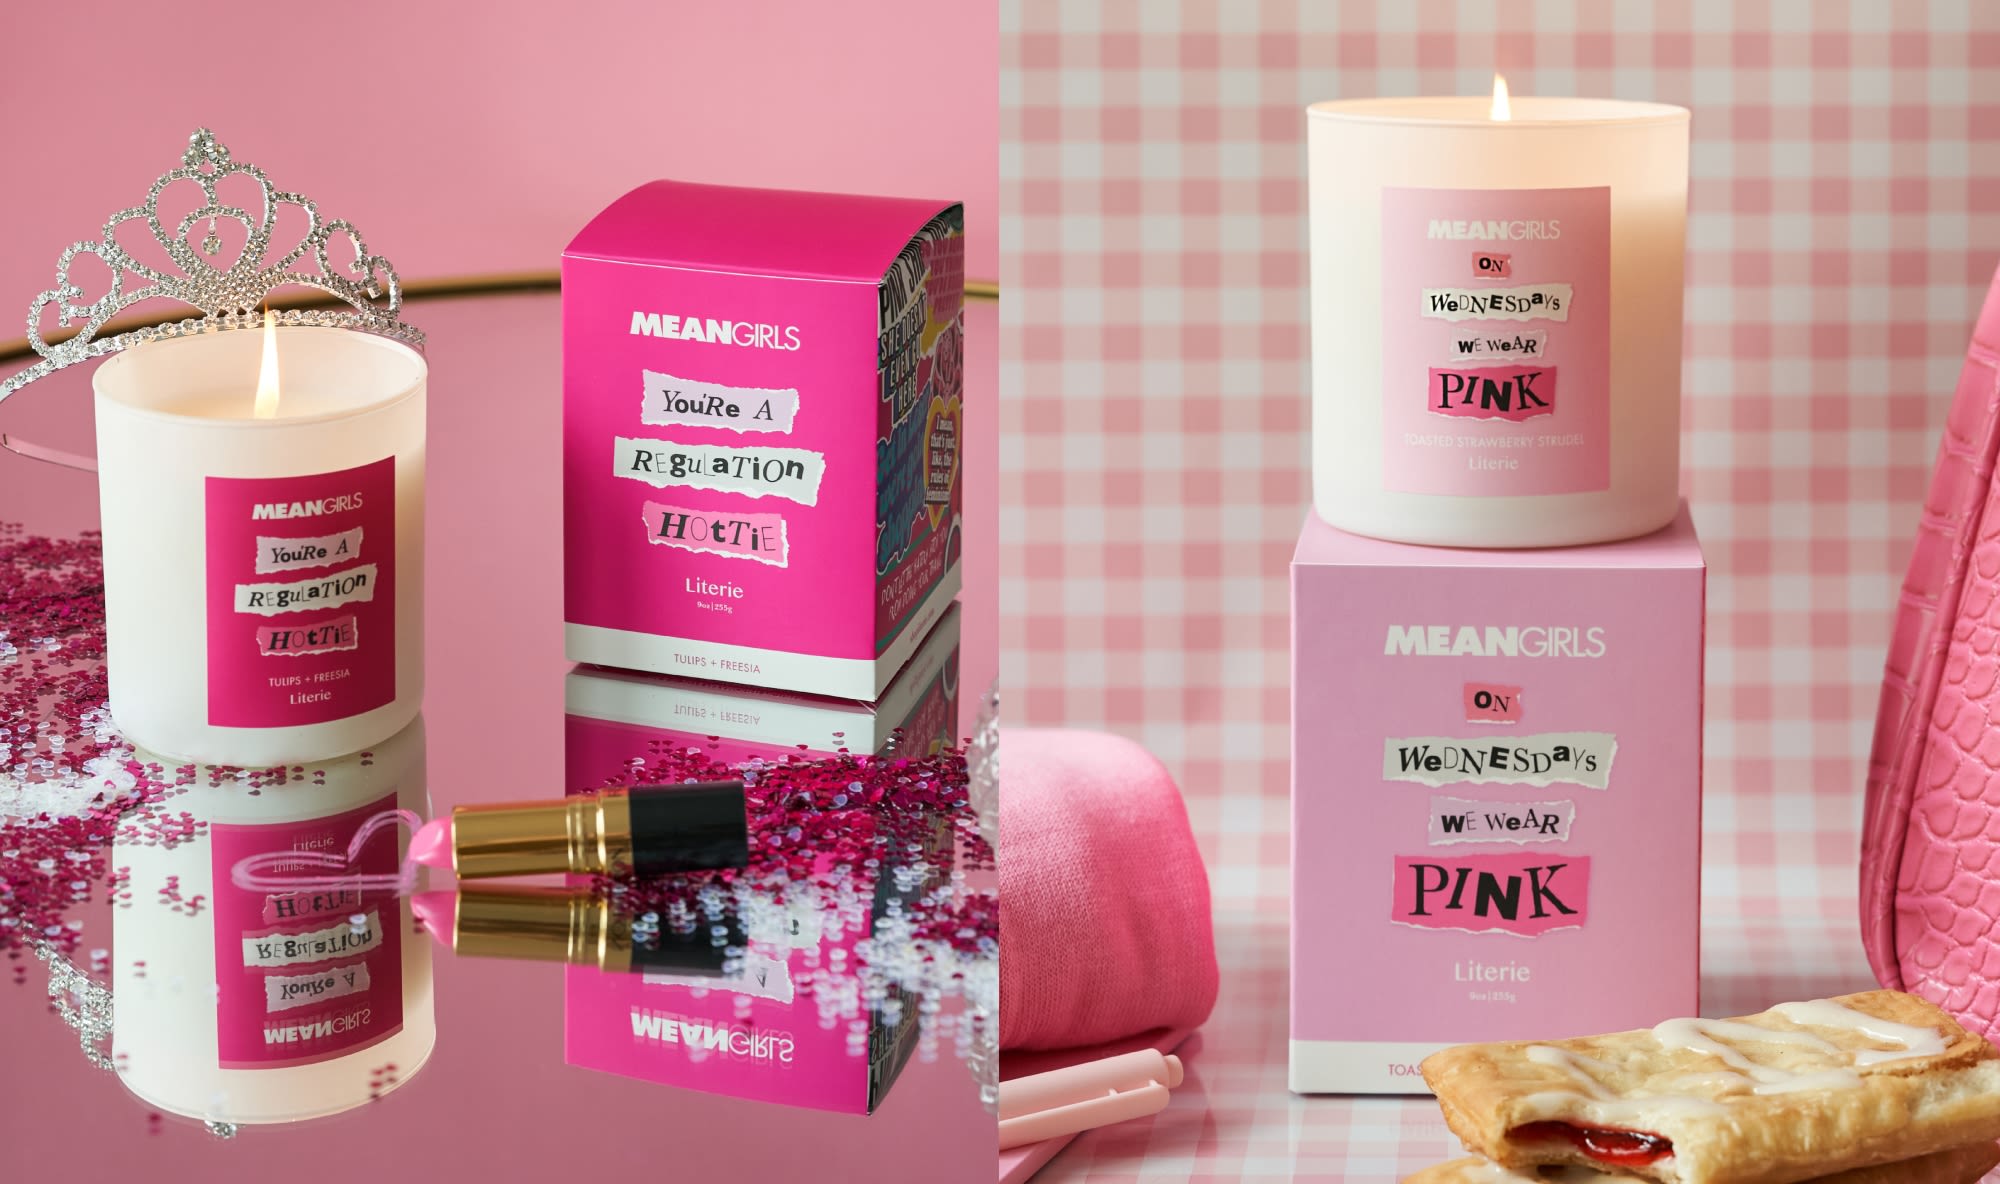 Literie Debuts ‘Mean Girls’-inspired Scented Candle Collection for the Film’s 20th Anniversary